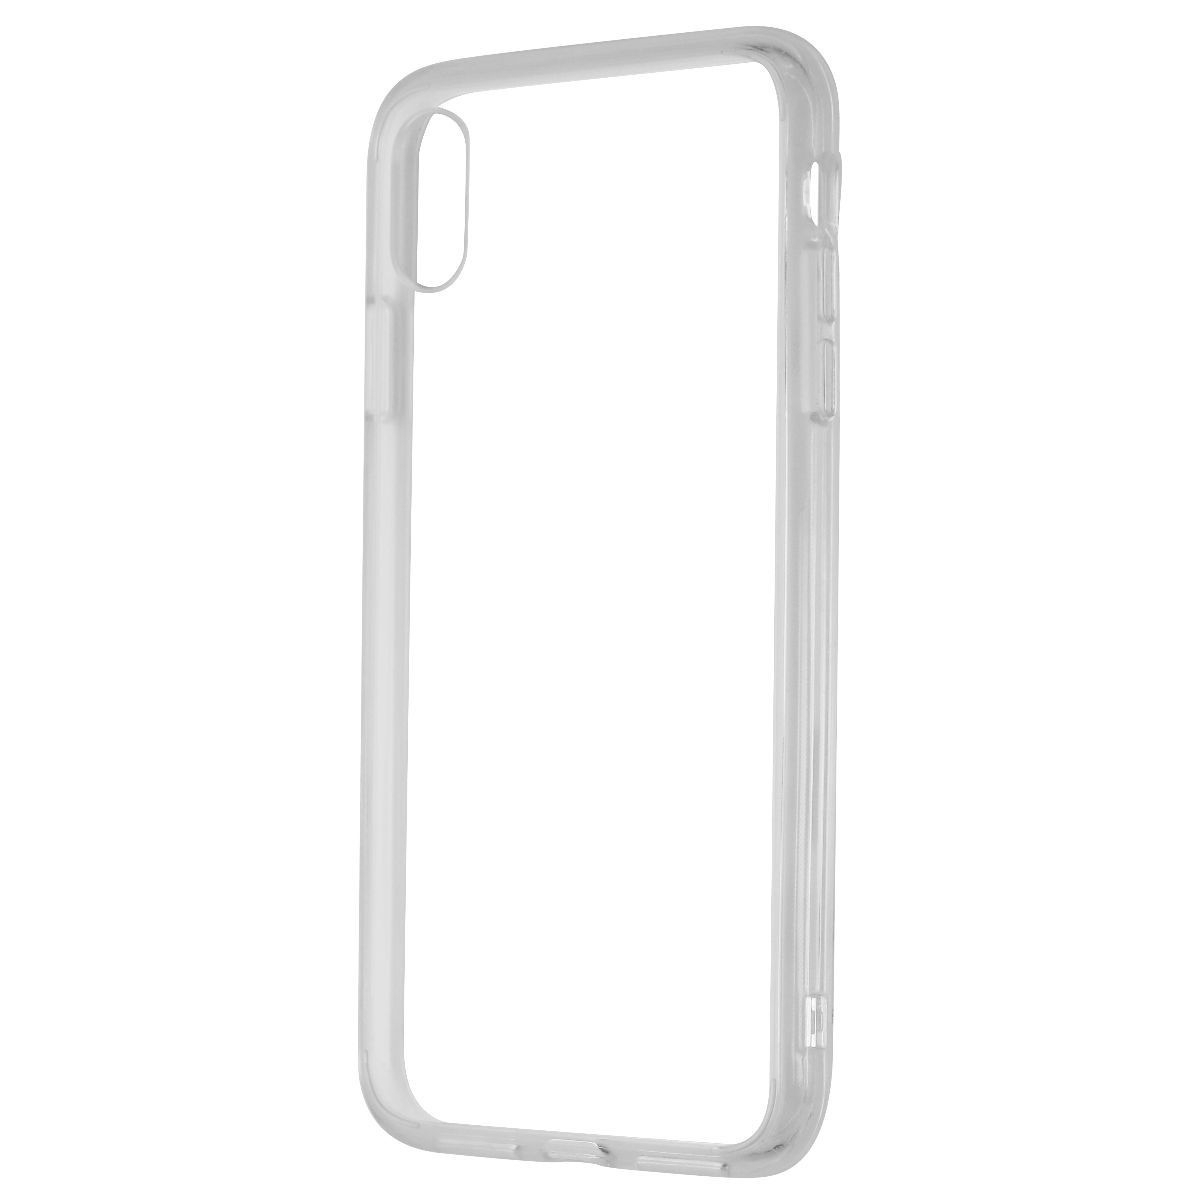 UBREAKIFIX Hardshell Case For Apple IPhone Xs Max - Clear